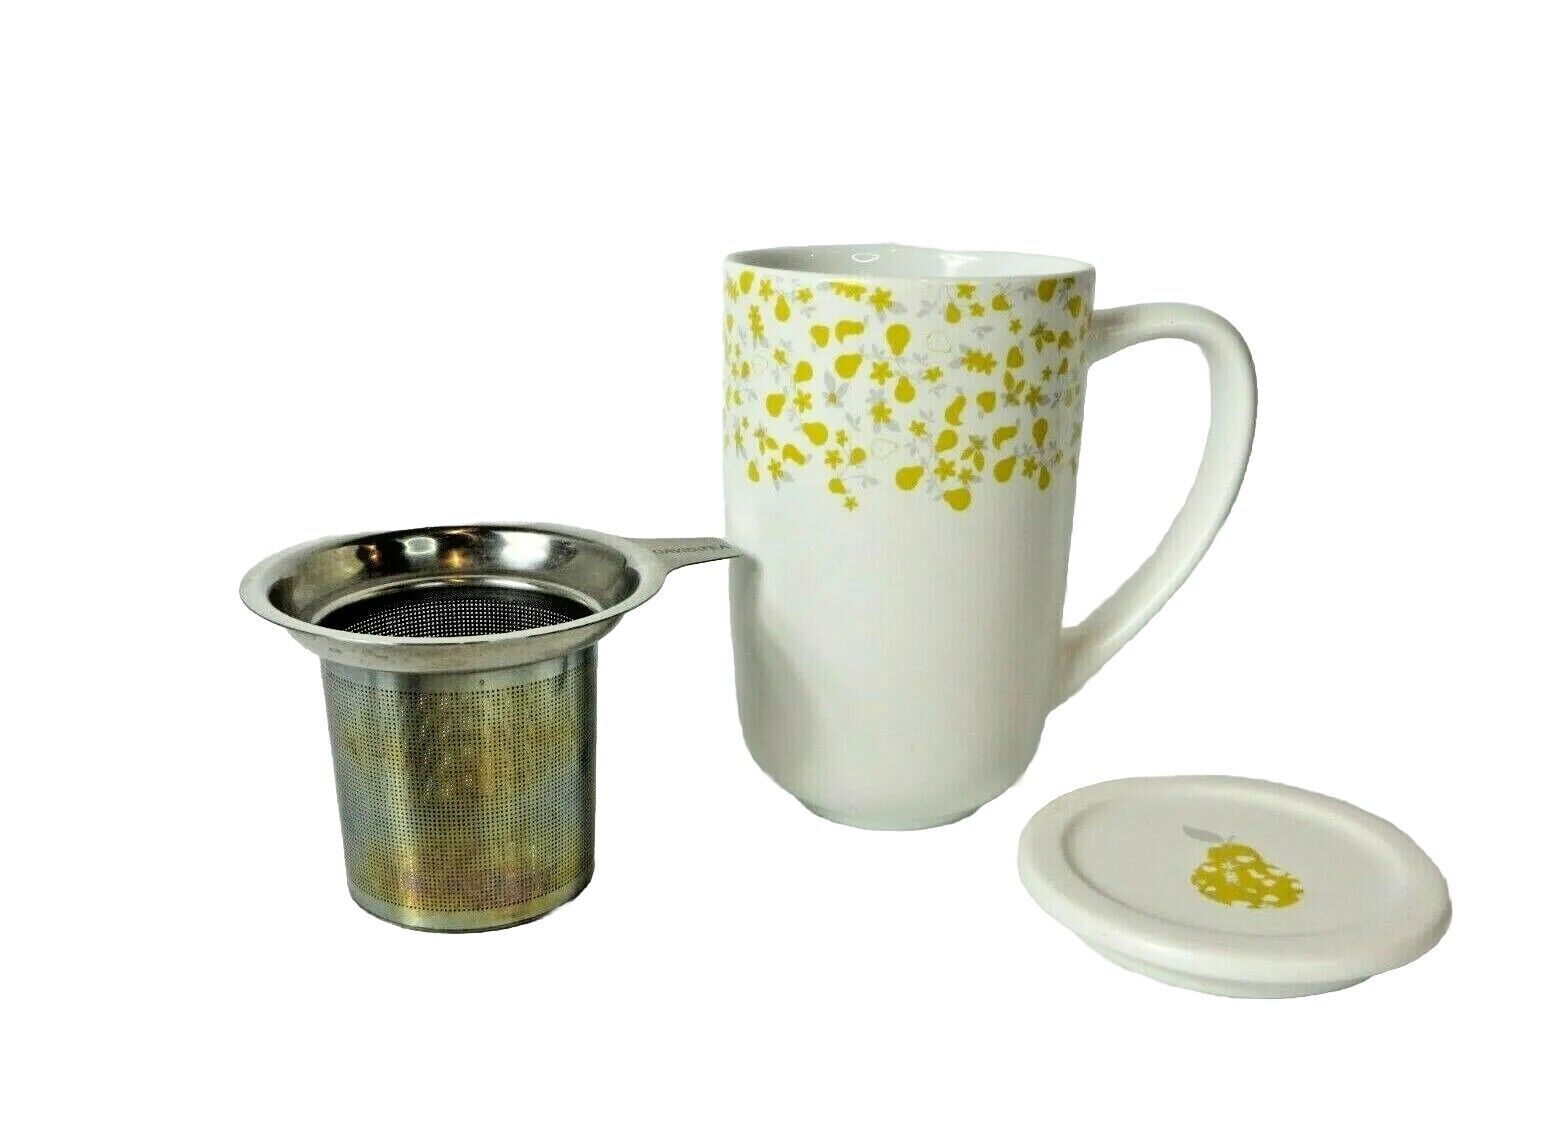 David's Davids Tea Mug Nordic White Yellow Flowers Pear With Infuser and Lid 